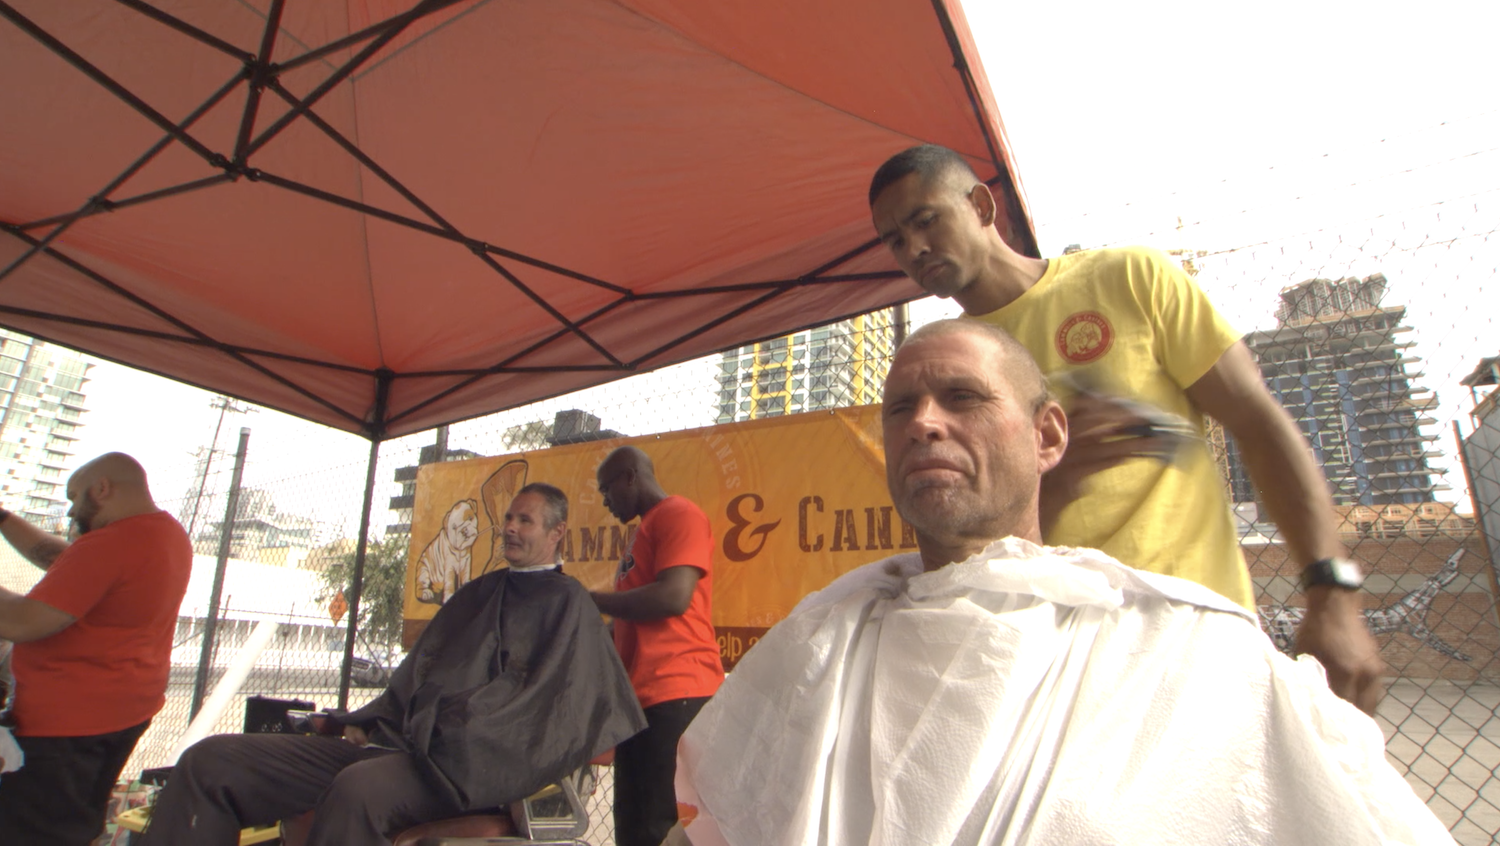 Cammies and Canines CEO and Founder gives haircuts to the homeless